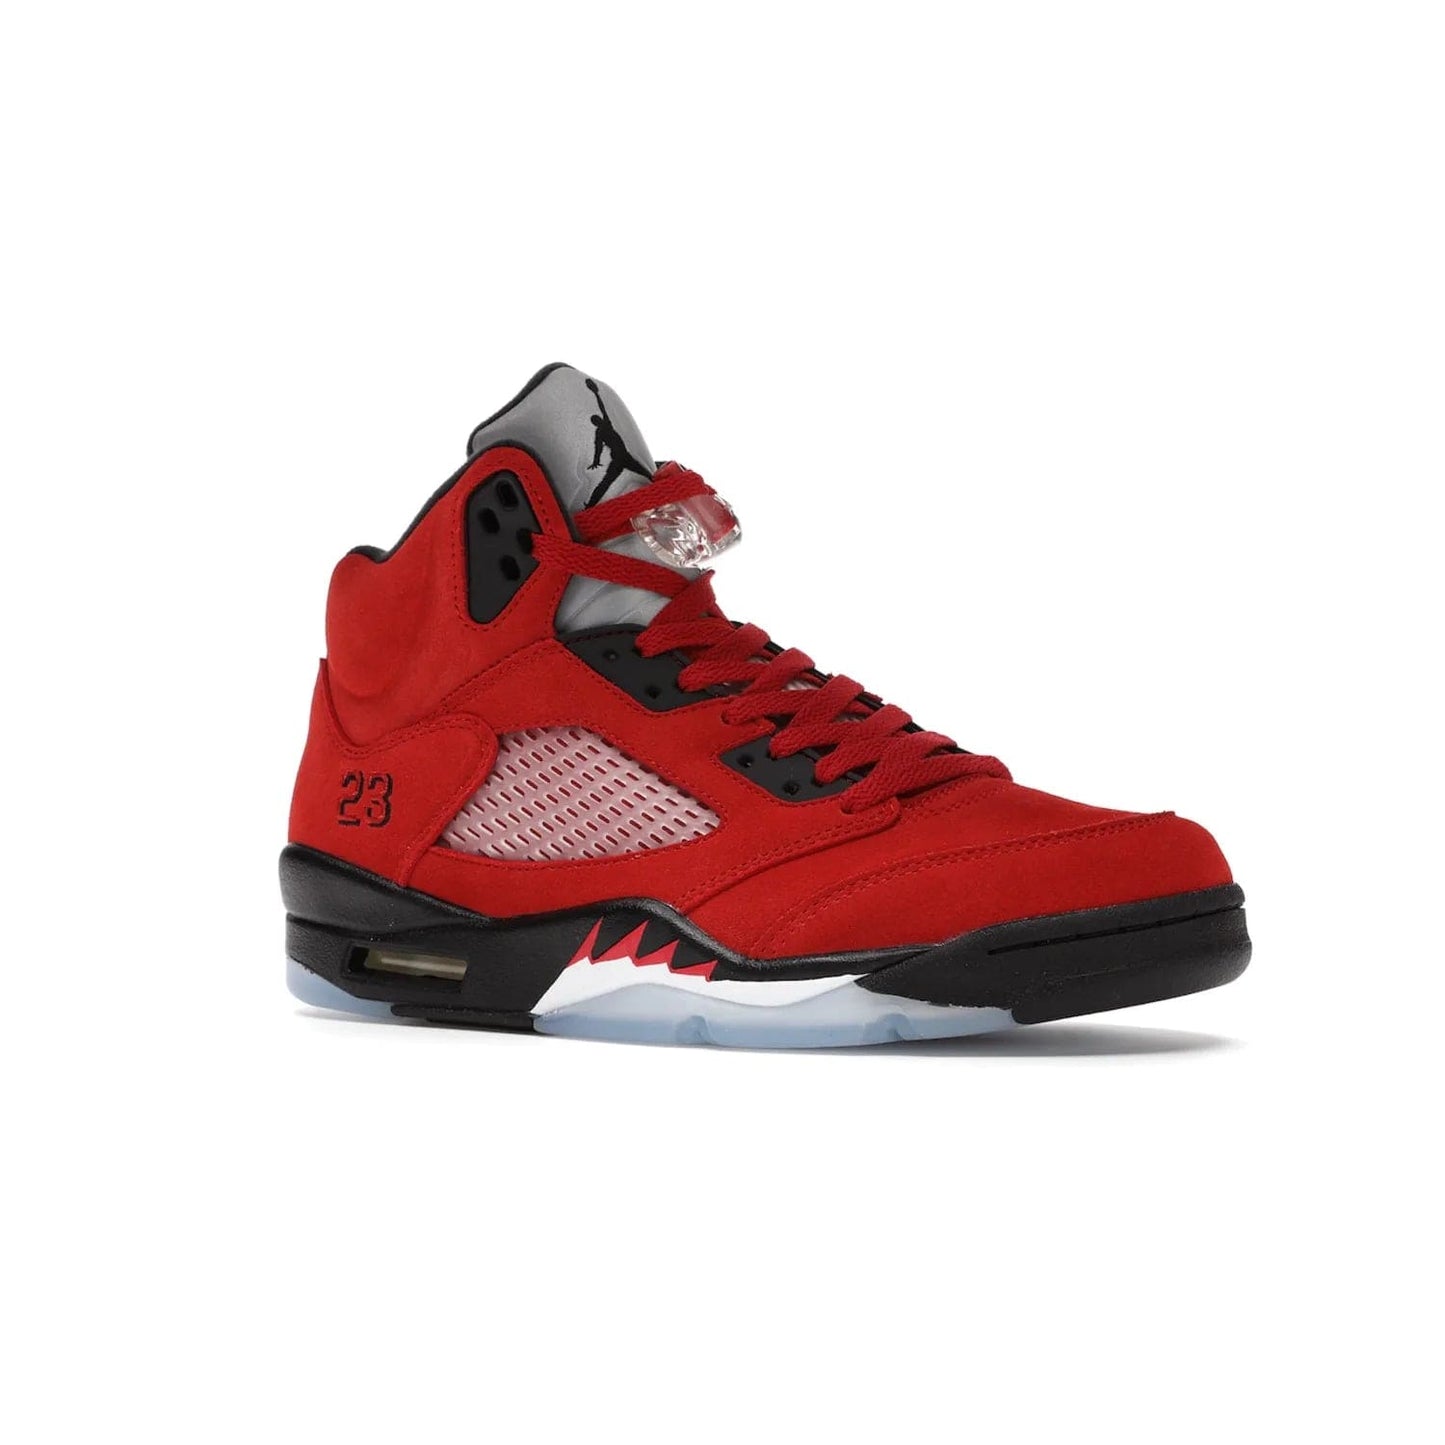 Jordan 5 Retro Raging Bull Red (2021) - Image 4 - Only at www.BallersClubKickz.com - Get ready for the 2021 stand-alone release of the Air Jordan 5 Raging Bulls! This all-suede upper combines luxe details like a Jumpman logo, red & black "23" embroidery and shark tooth detailing, atop a black midsole. Don't miss out - release date in April 2021 for $190.